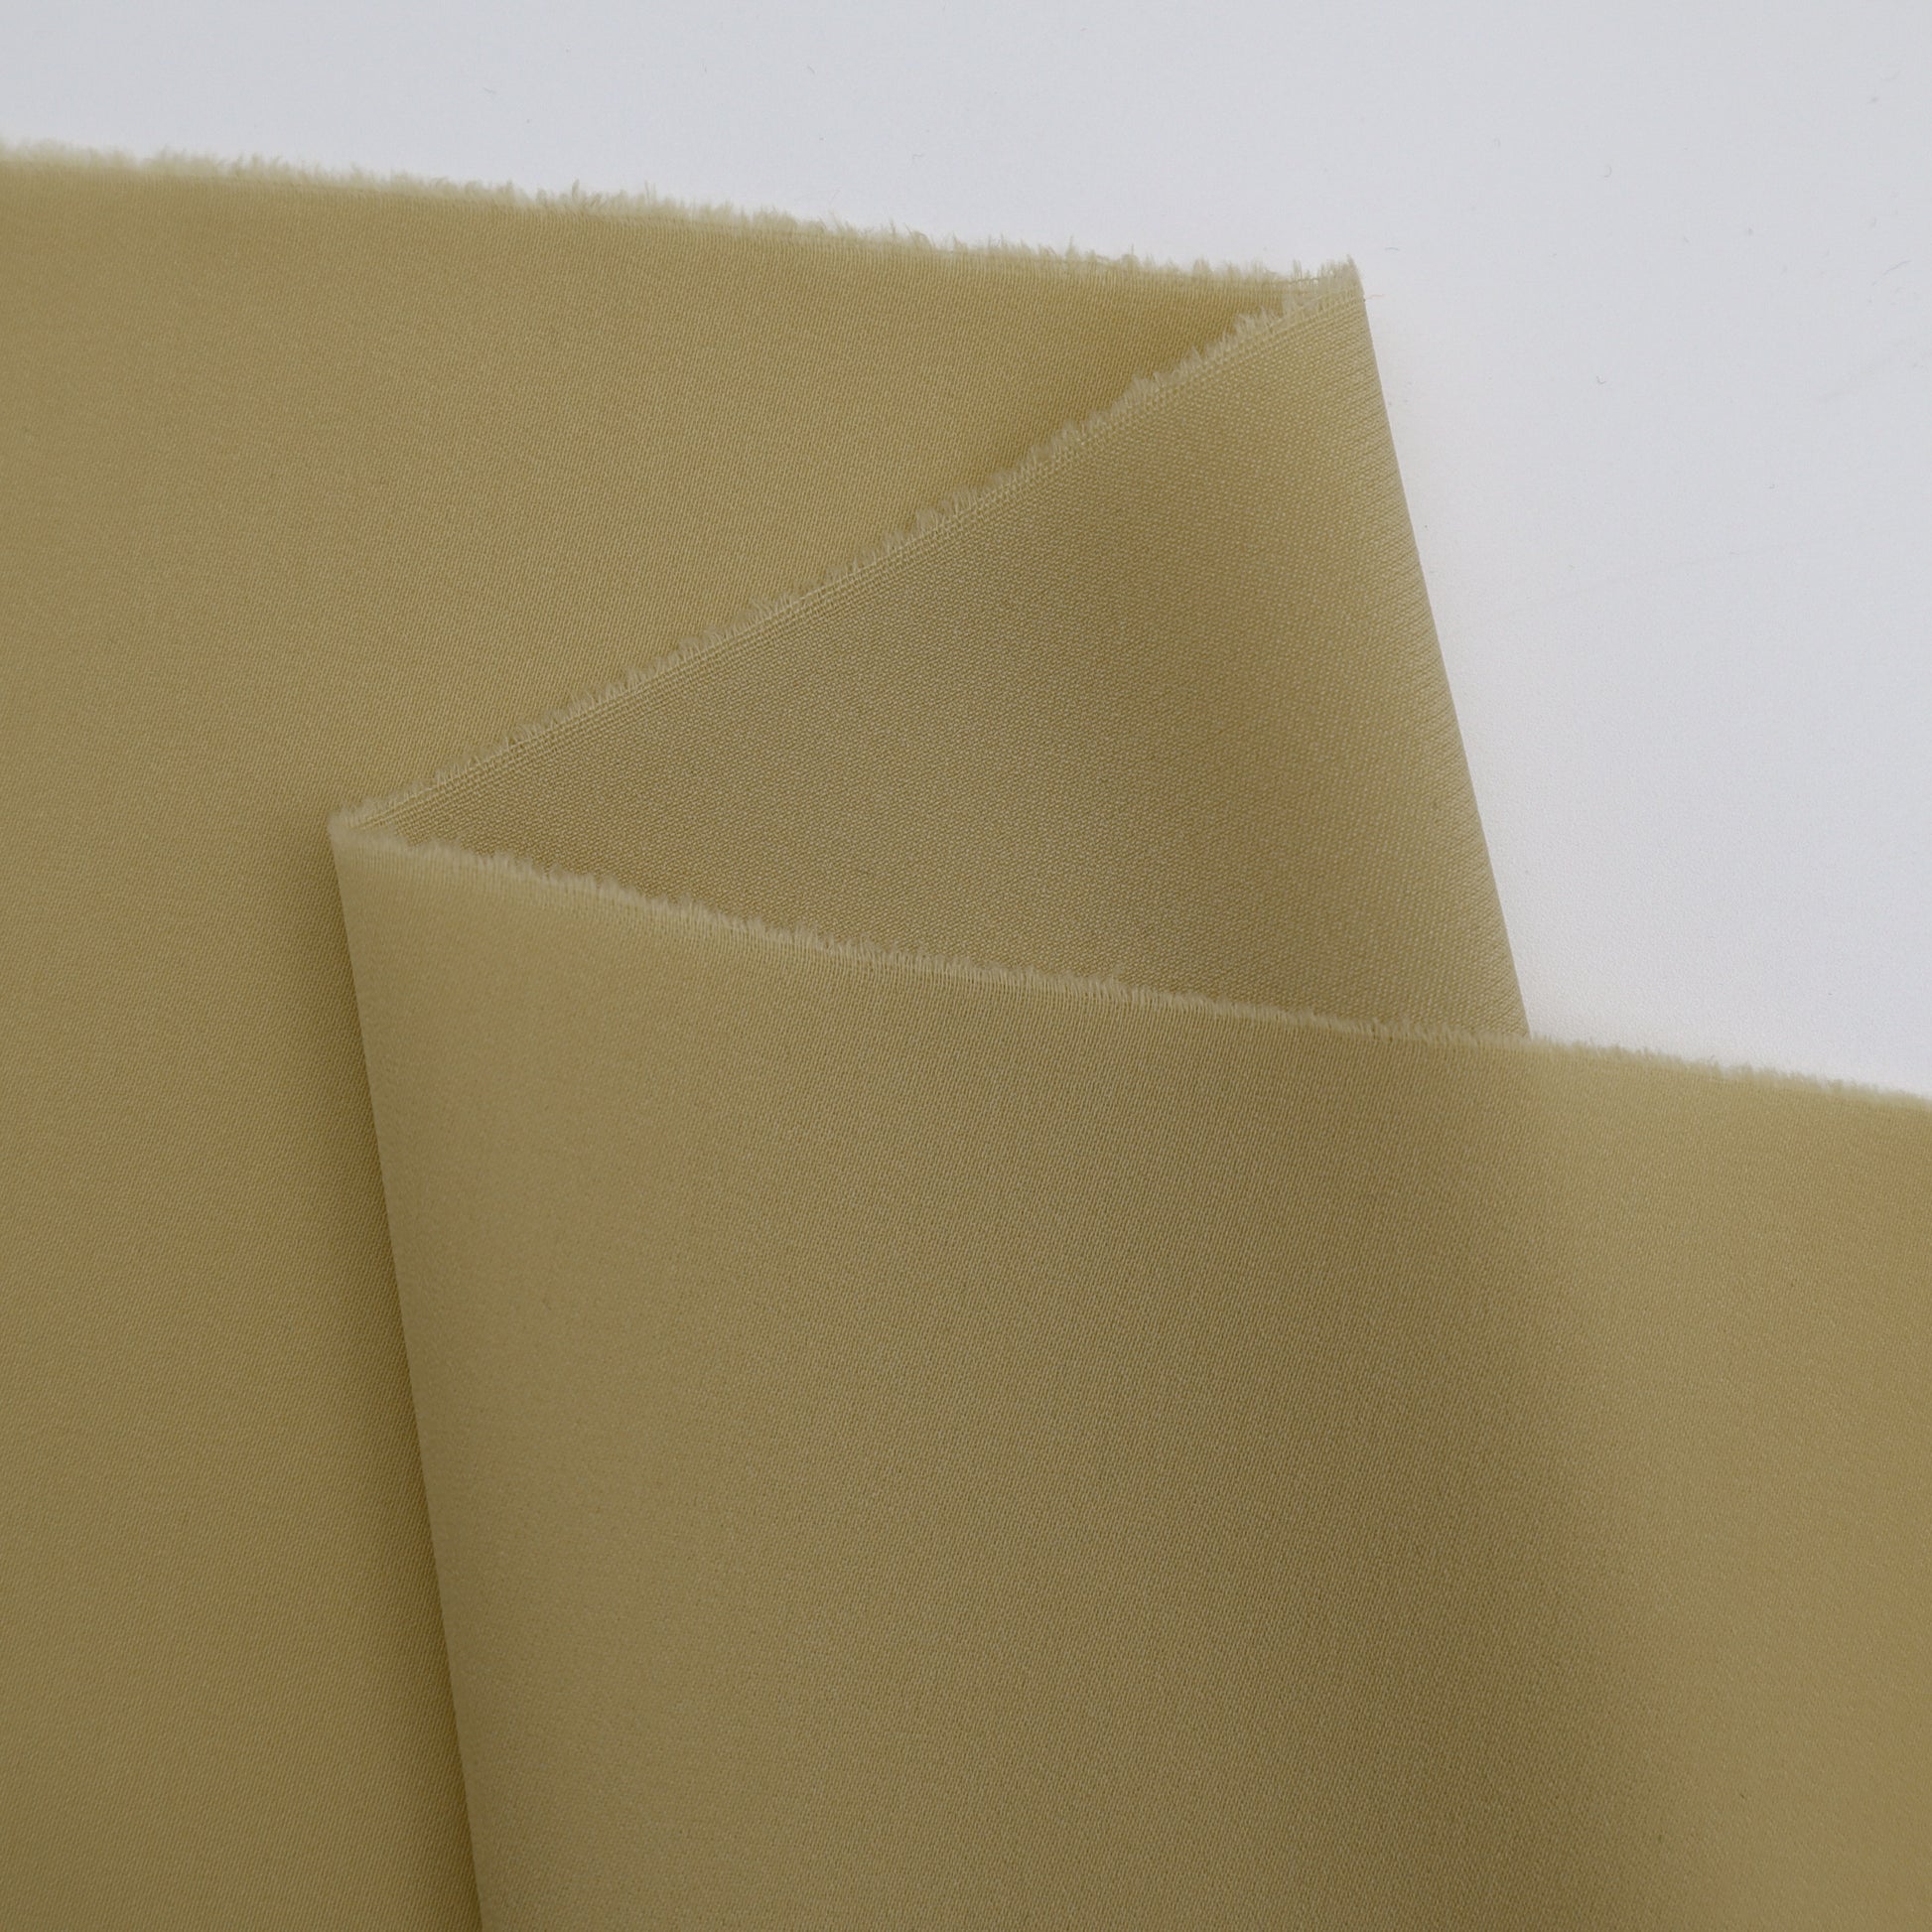 Lightweight Polyester Voile in Marzipan (Yellow)